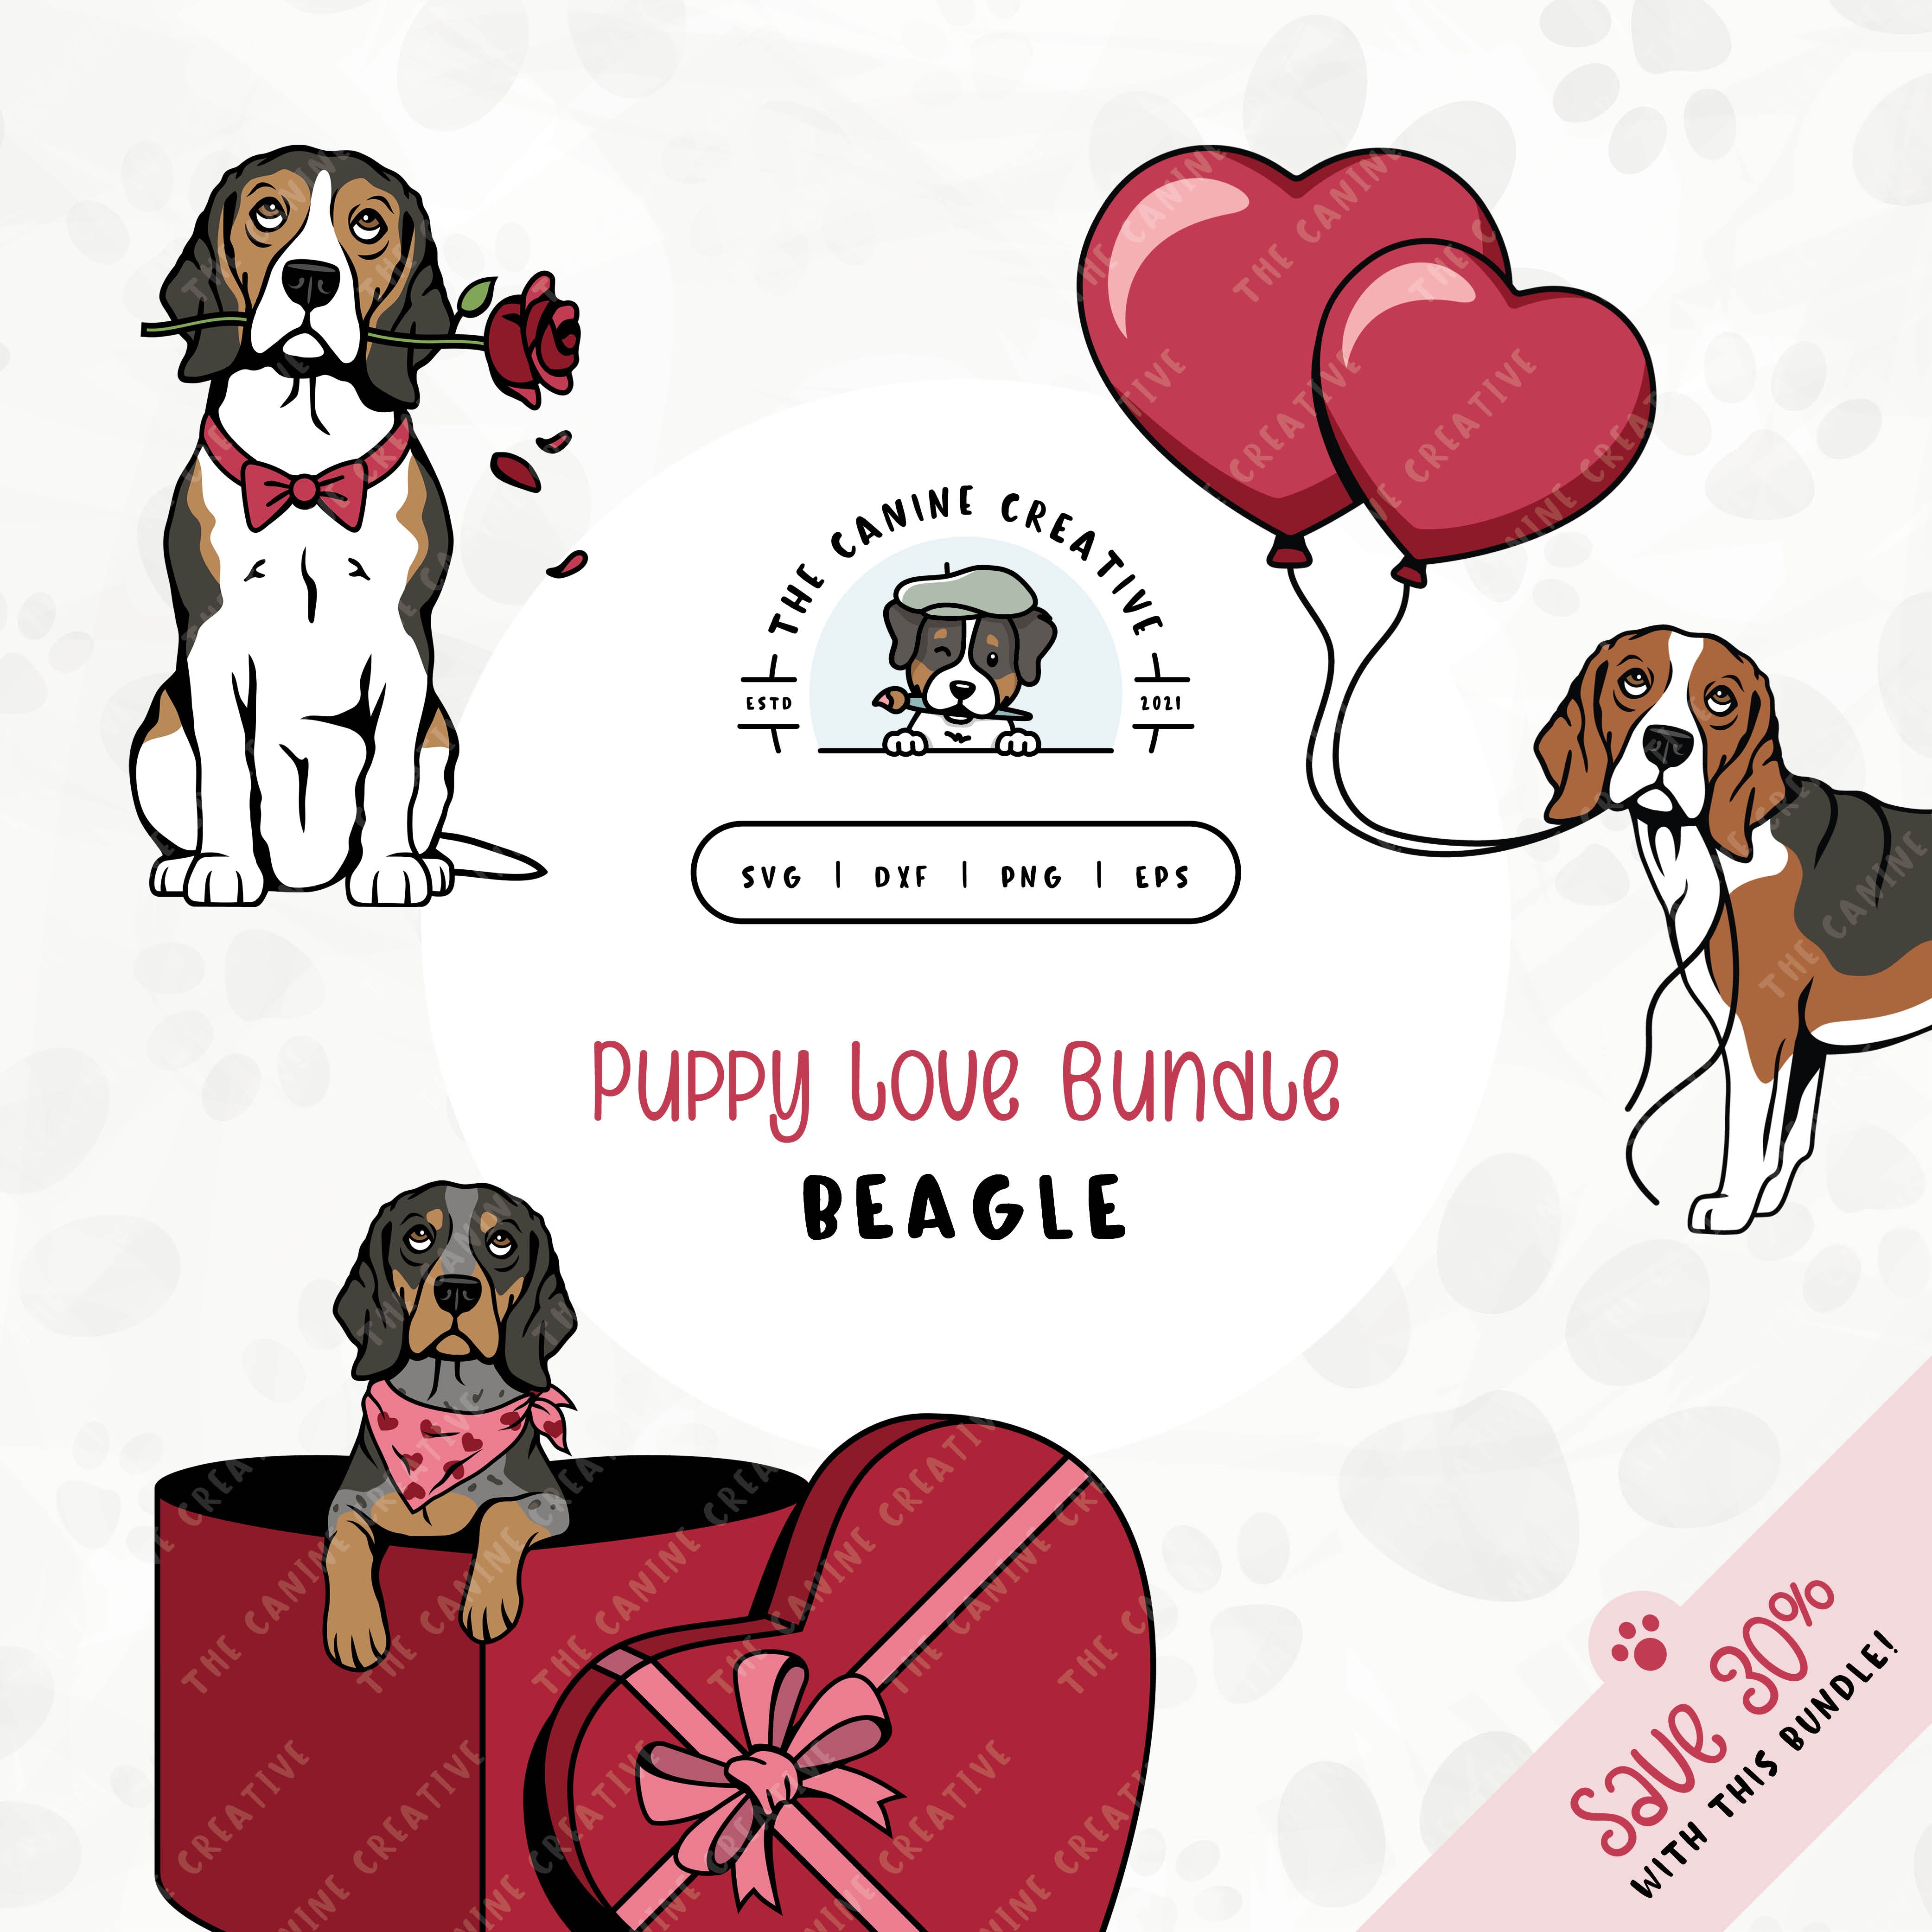 This 3-pack puppy love illustration bundle features Beagles holding heart balloons, peeking out of a heart-shaped box, and holding a rose. File formats include: SVG, DXF, PNG, and EPS.